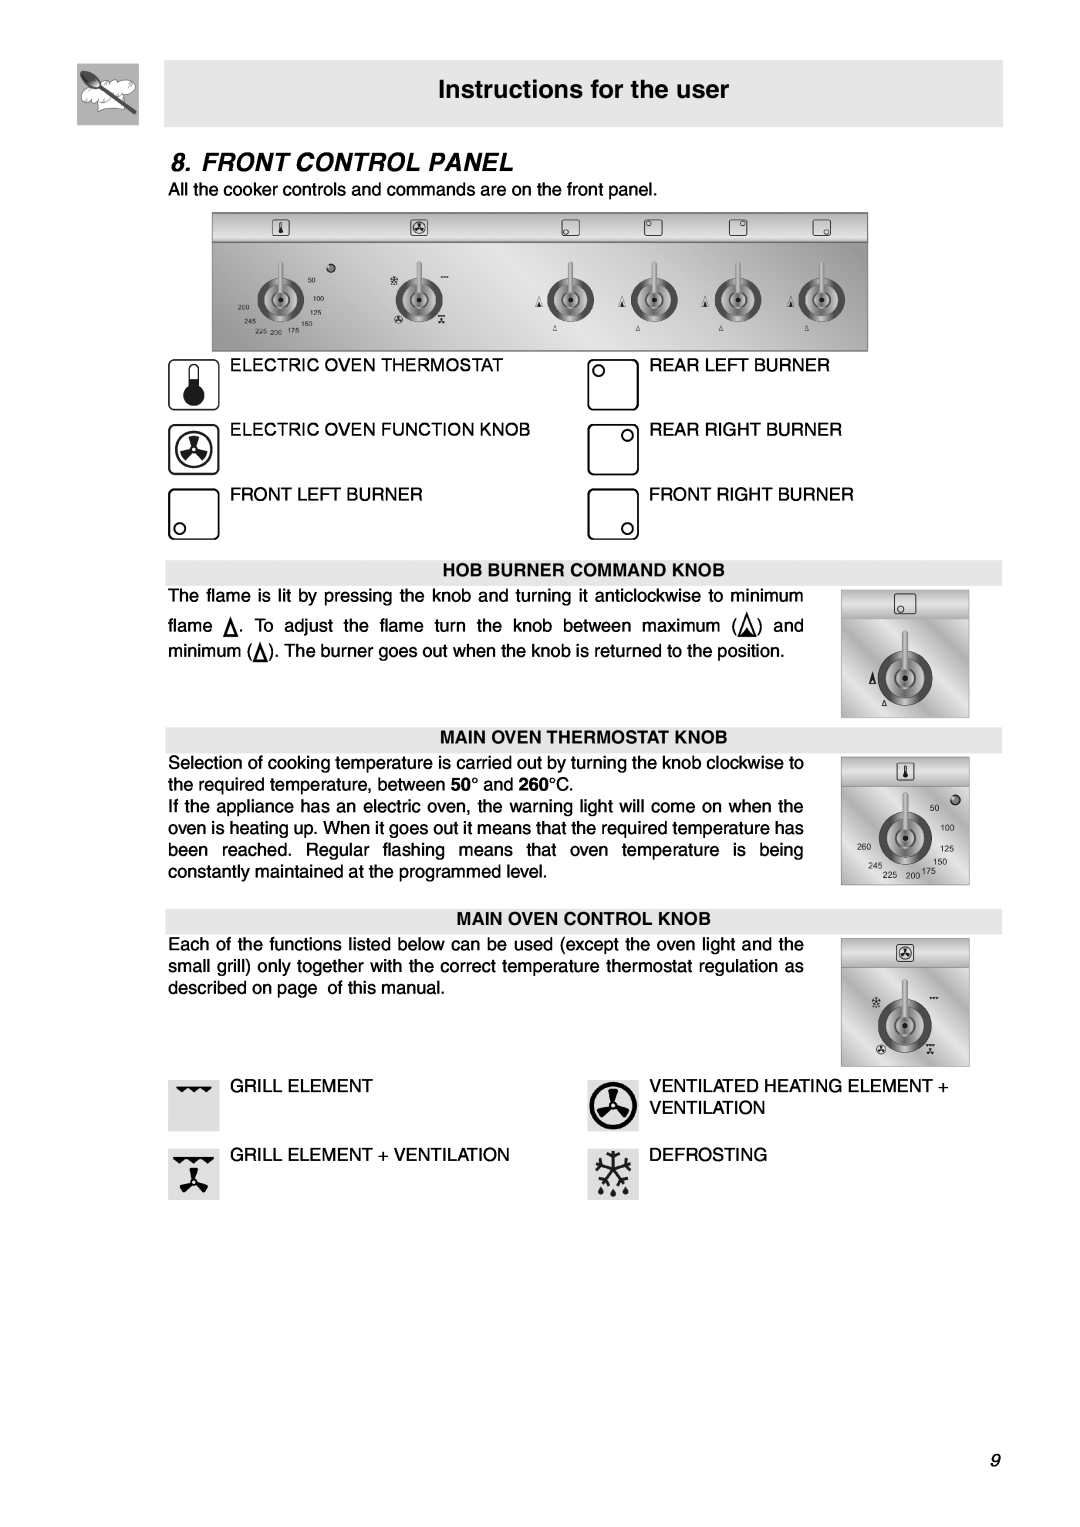 Smeg SNZ60EVX manual Front Control Panel, Instructions for the user, Hob Burner Command Knob, Main Oven Thermostat Knob 